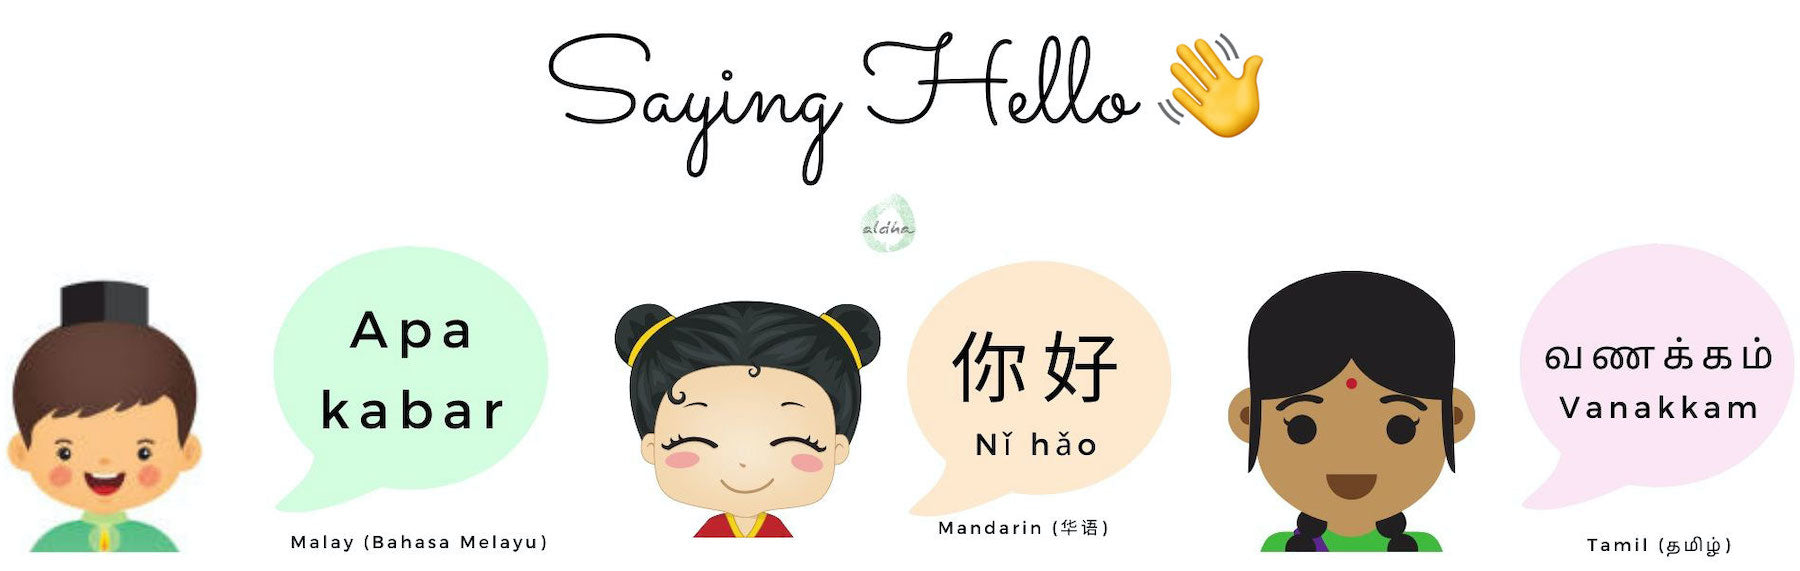 Saying hello in 3 different languages Singapore